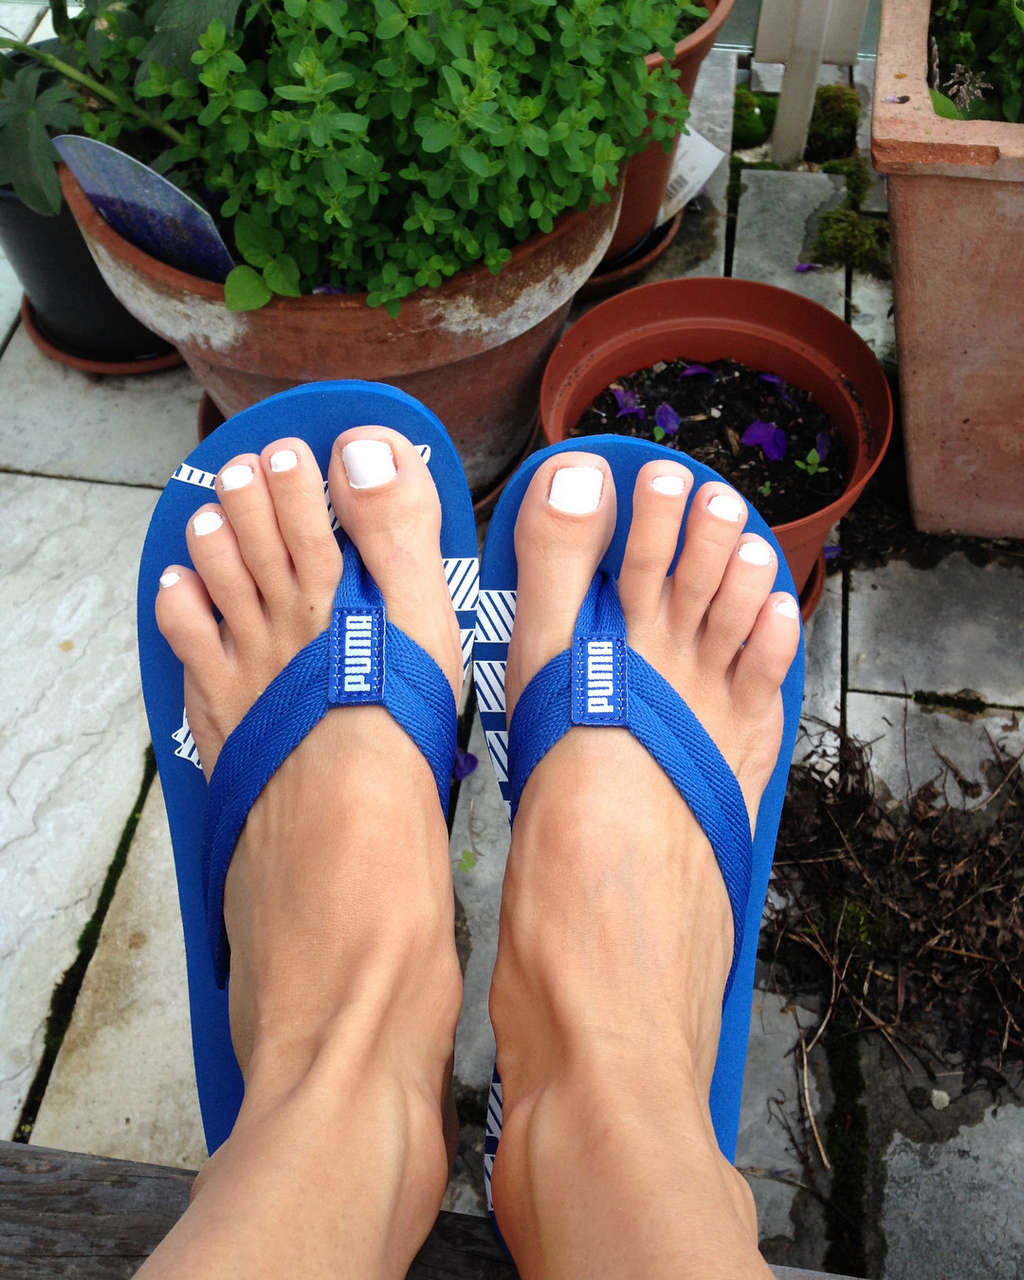 New Blue Flip Flops The Comfiest Thanks To Fee